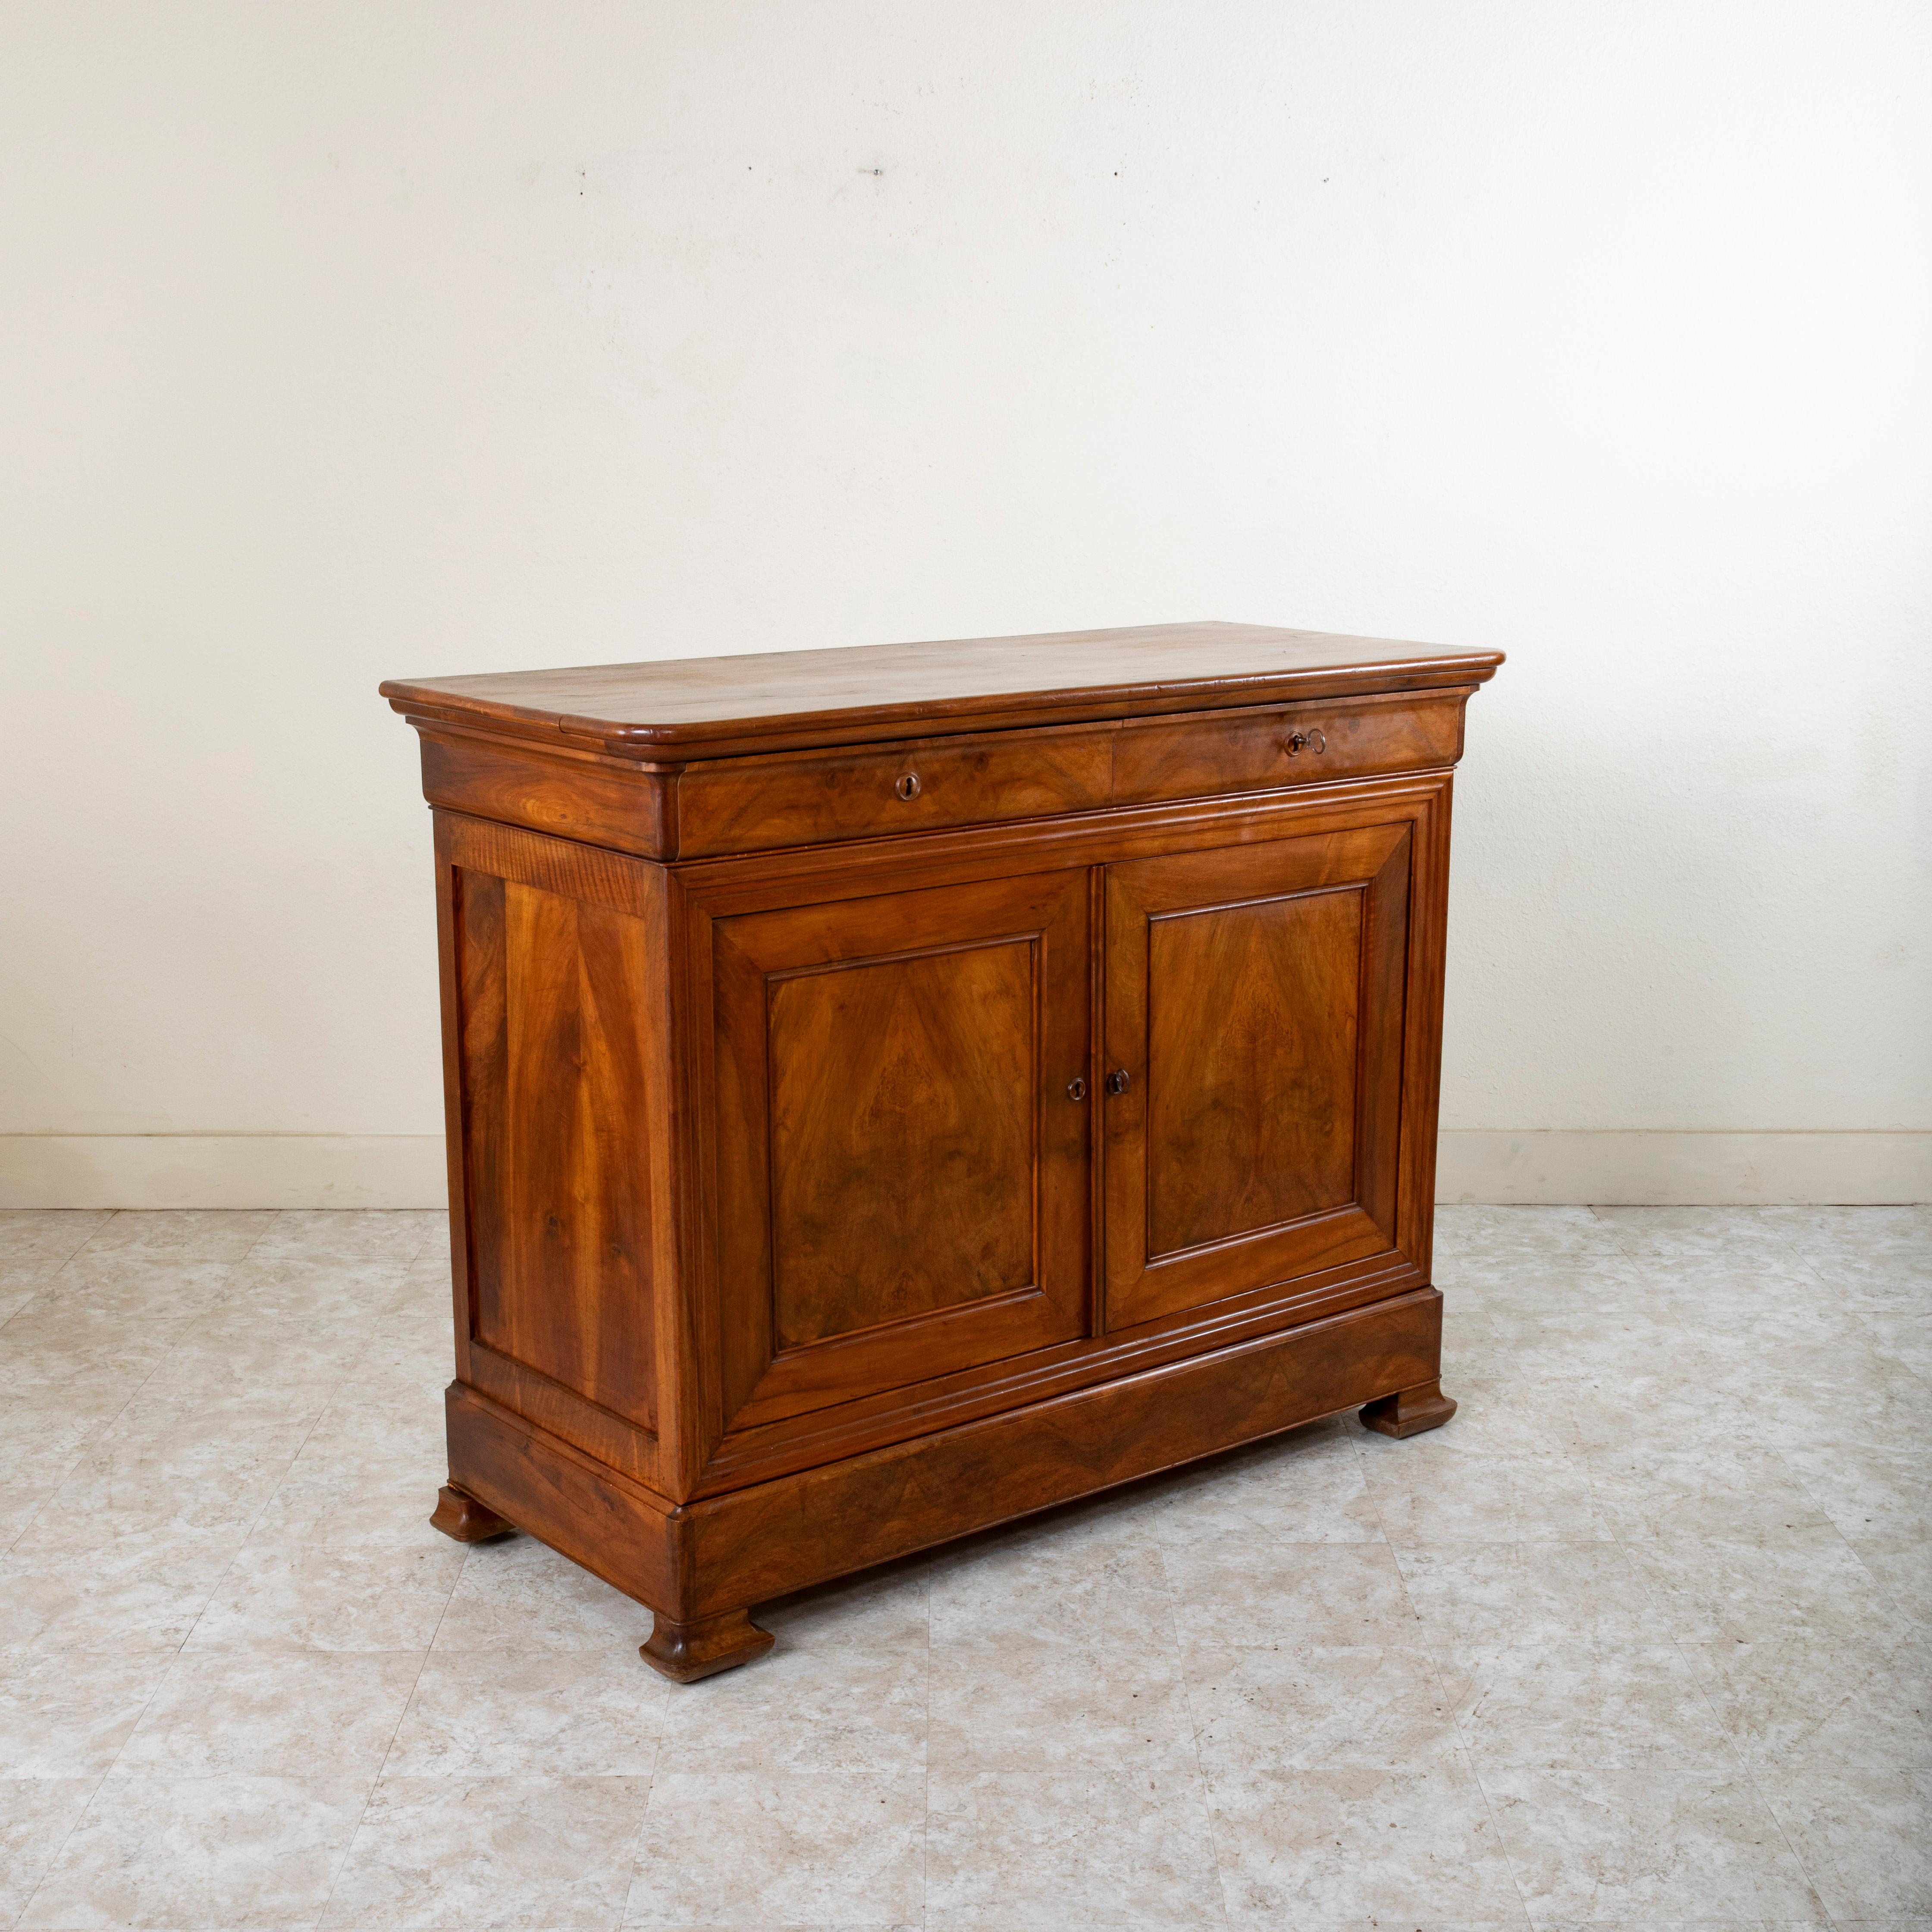 Tall Mid-19th Century French Louis Philippe Period Walnut Buffet or Sideboard In Good Condition For Sale In Fayetteville, AR